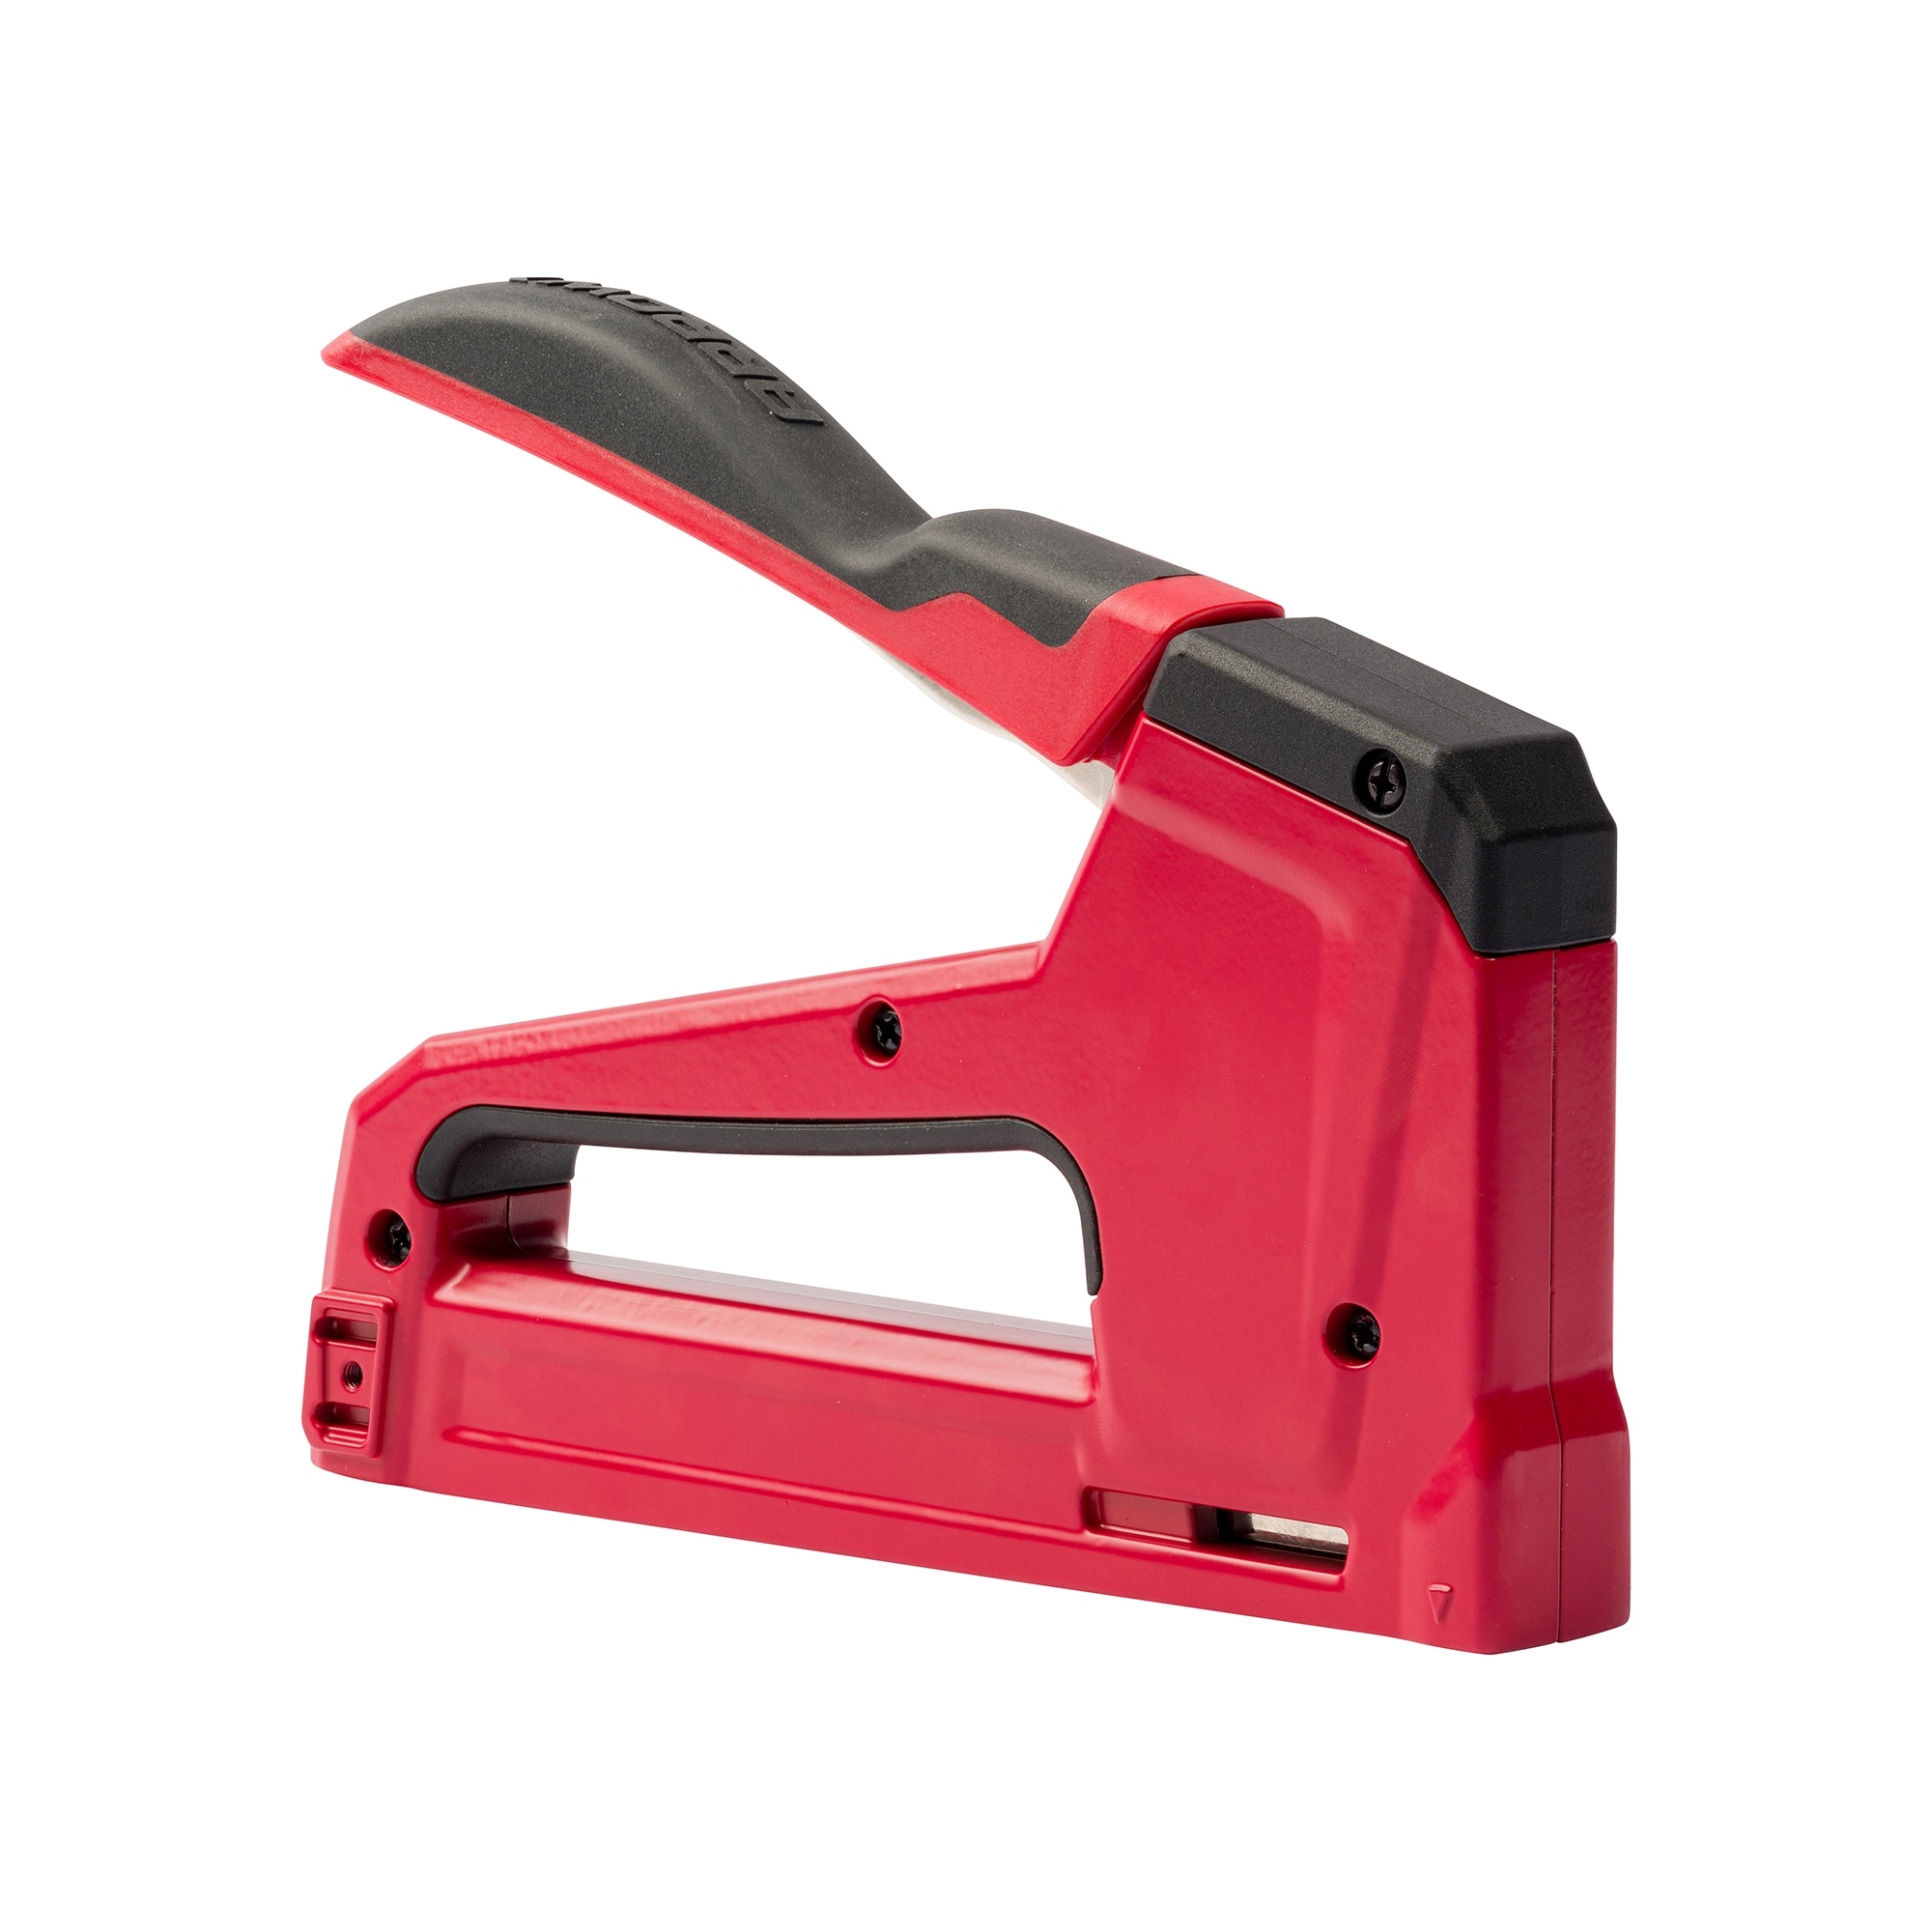 XL Pro 2-in-1 Foot File and Foot Buffer System - Red